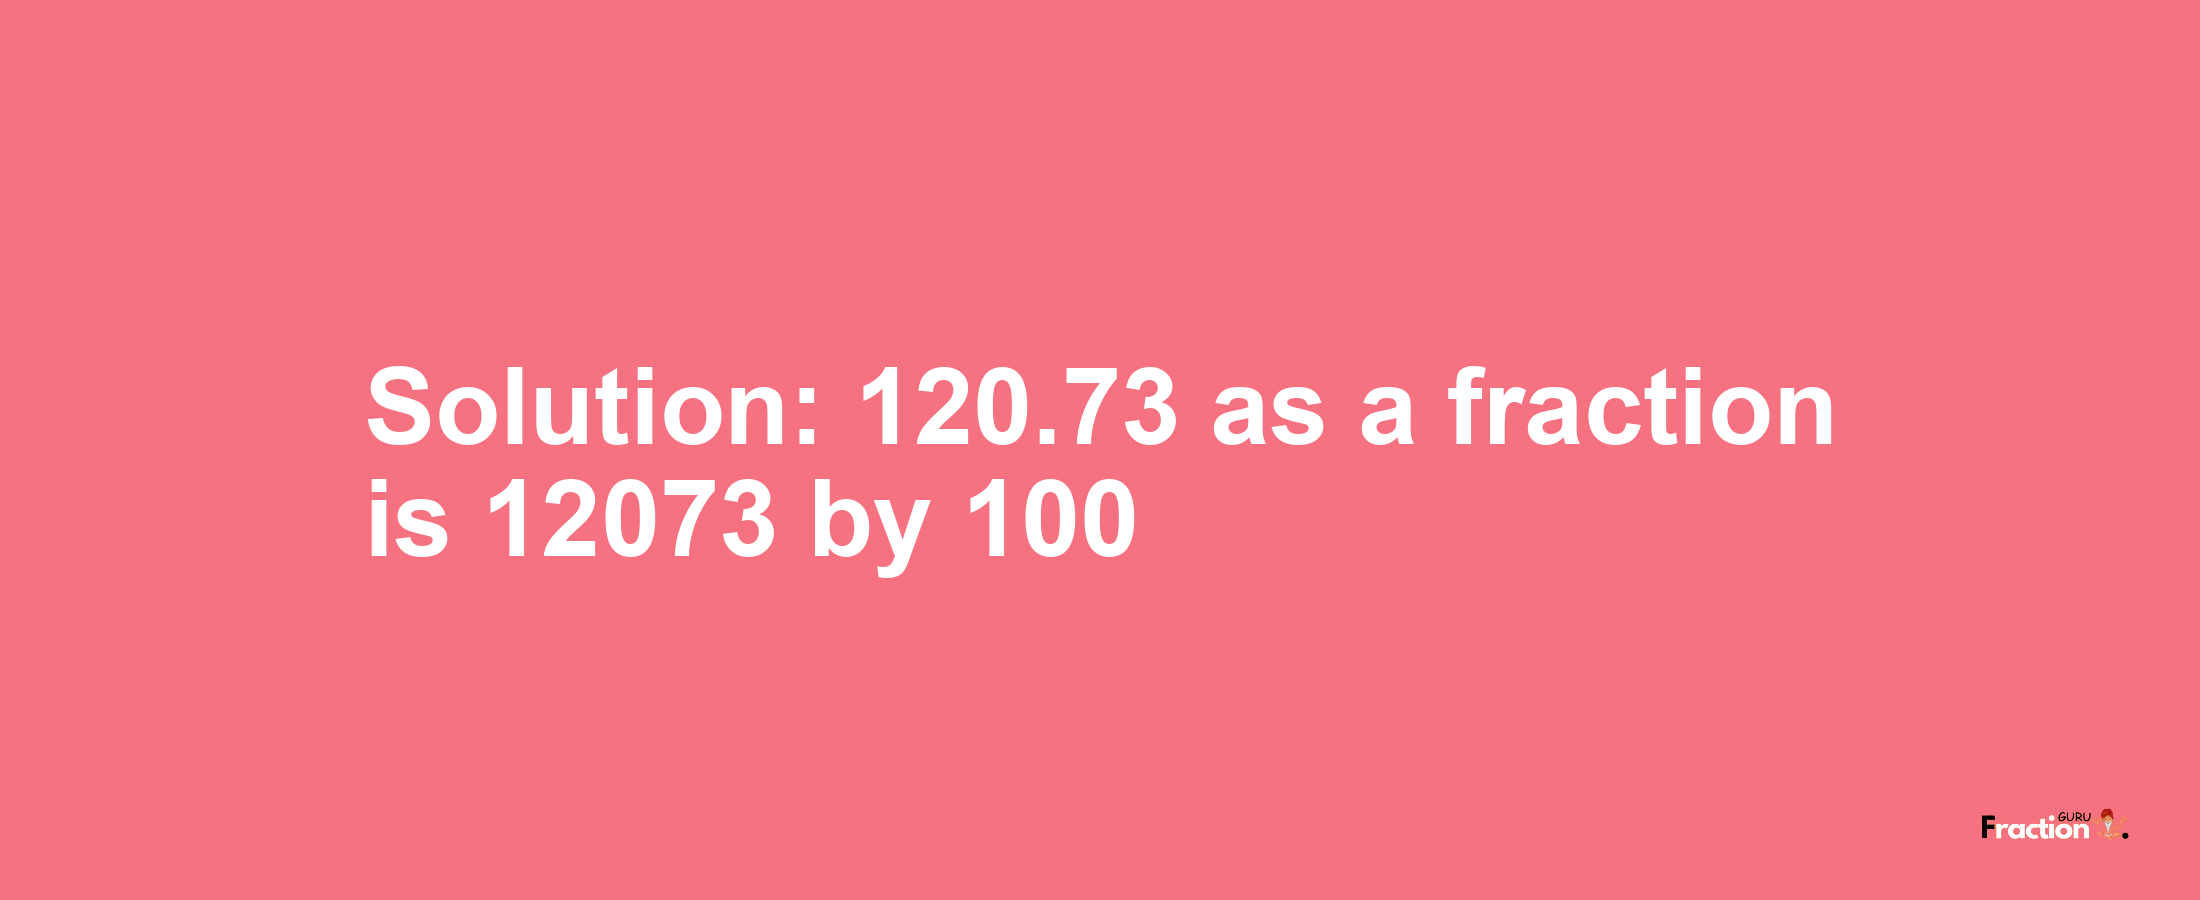 Solution:120.73 as a fraction is 12073/100